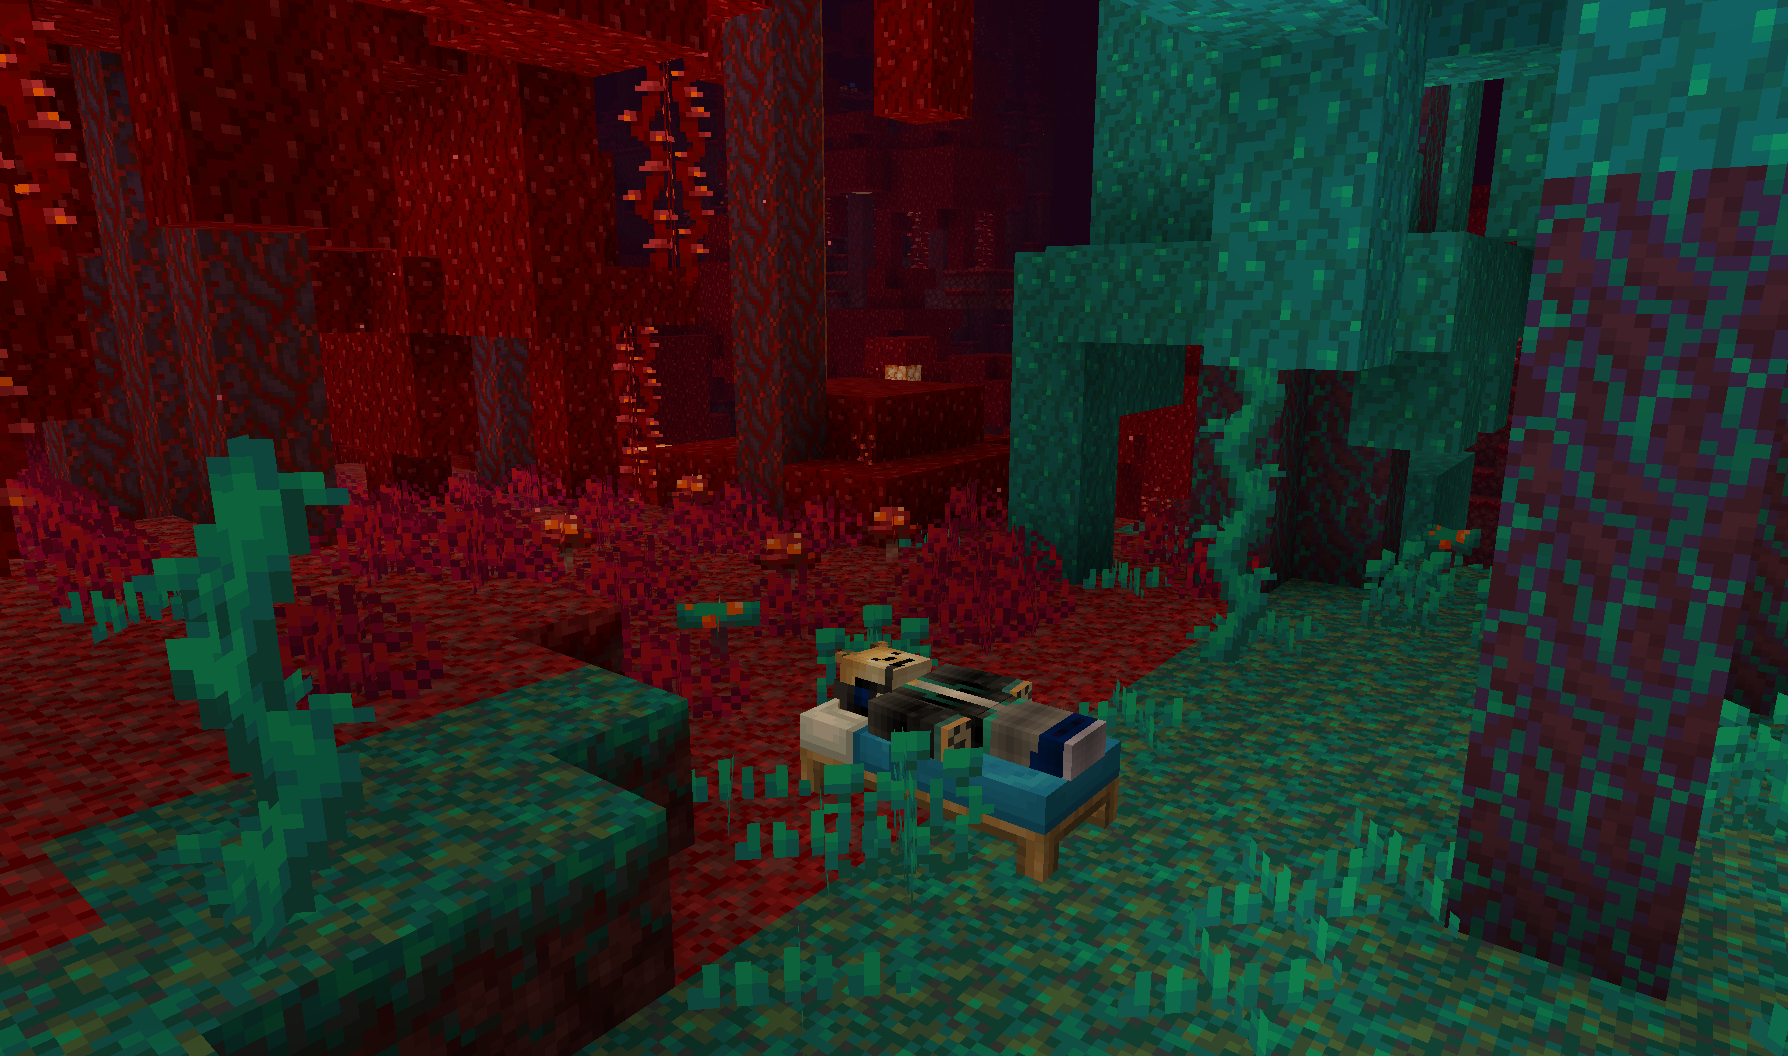 Infinidoge's player is sleeping in a bed in the Nether between a Crimson Forest and a Warped Forest.